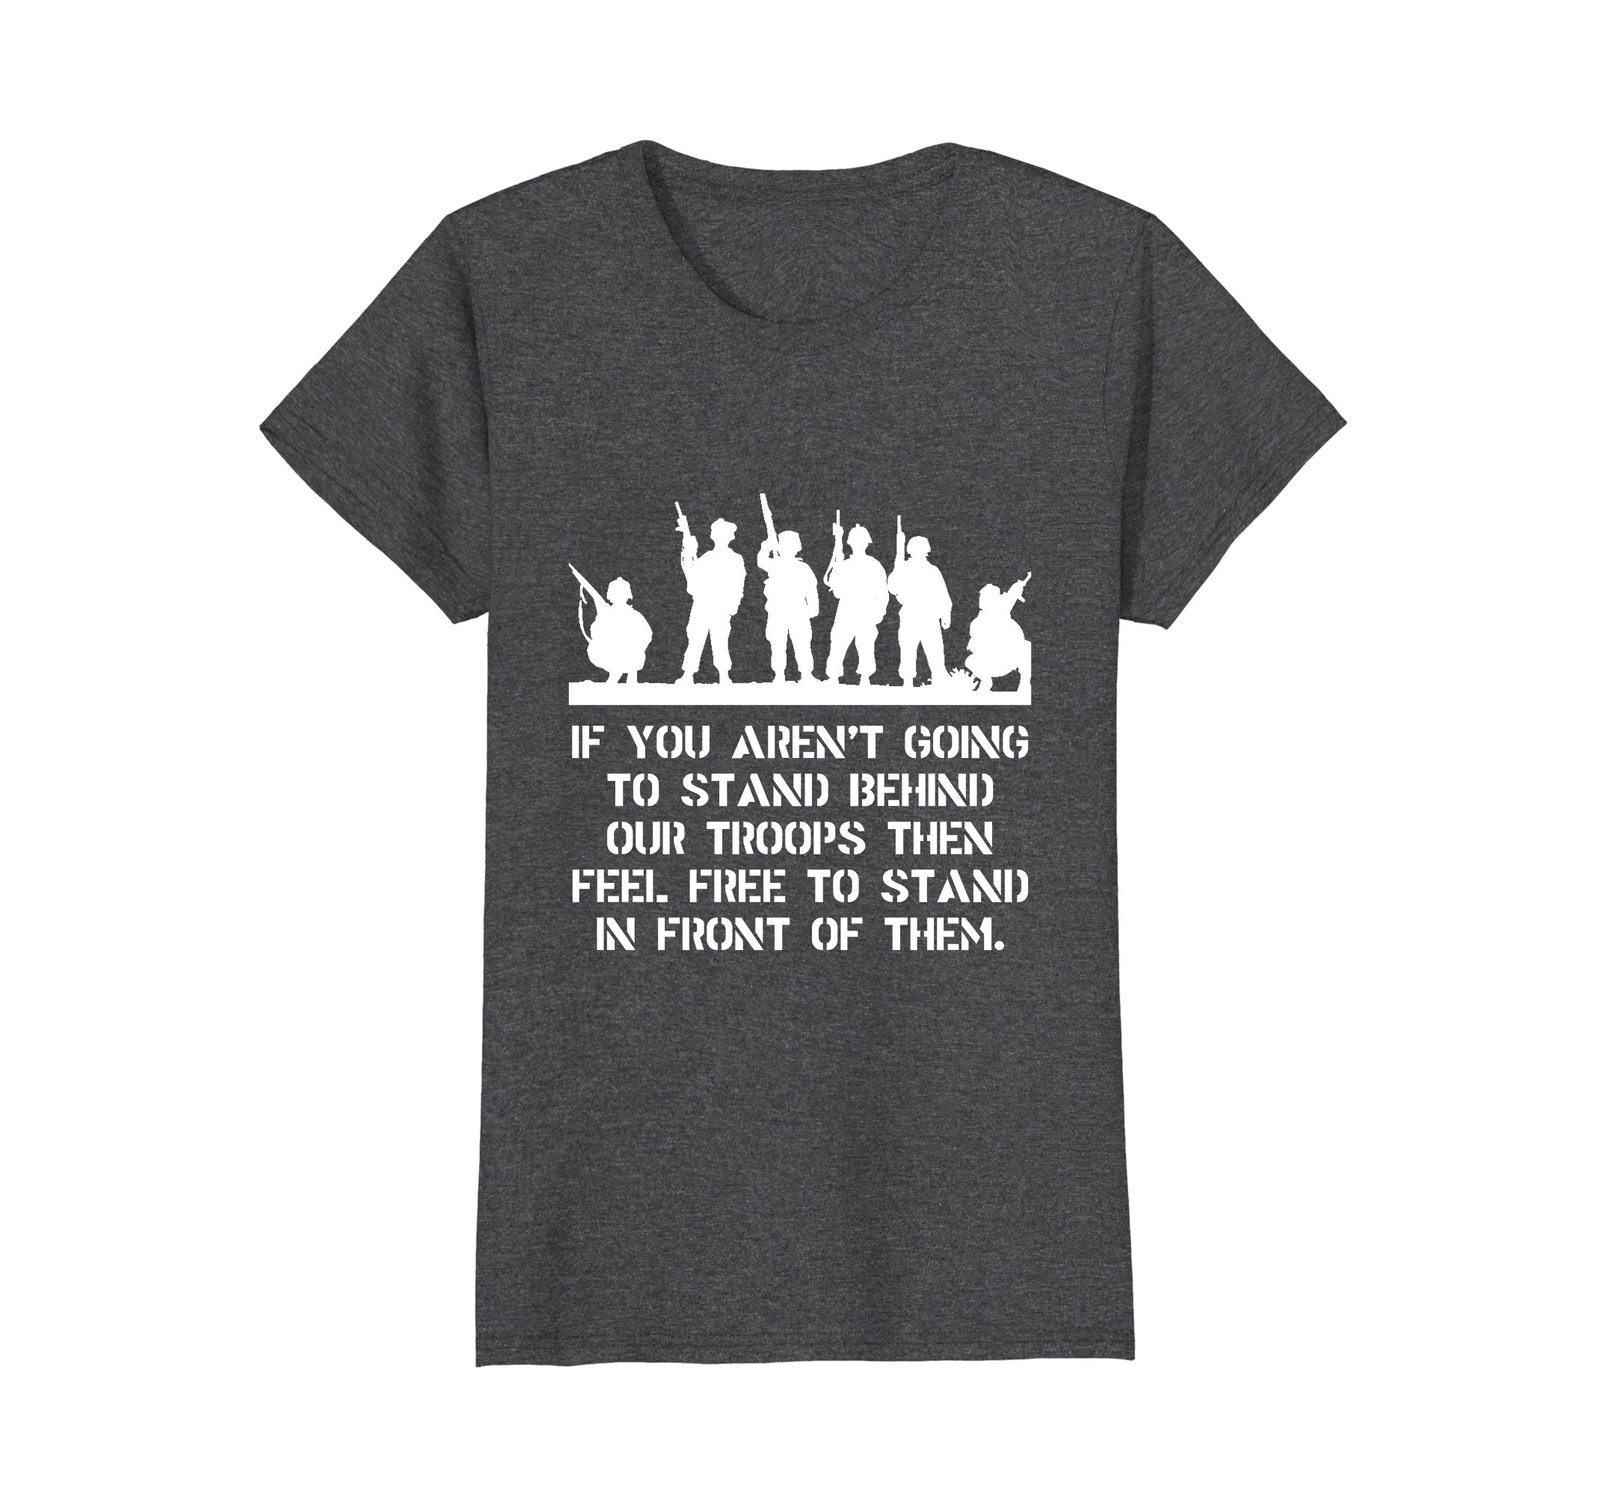 Funny Shirts - Stand Behind Our Troops Funny T-Shirt Wowen